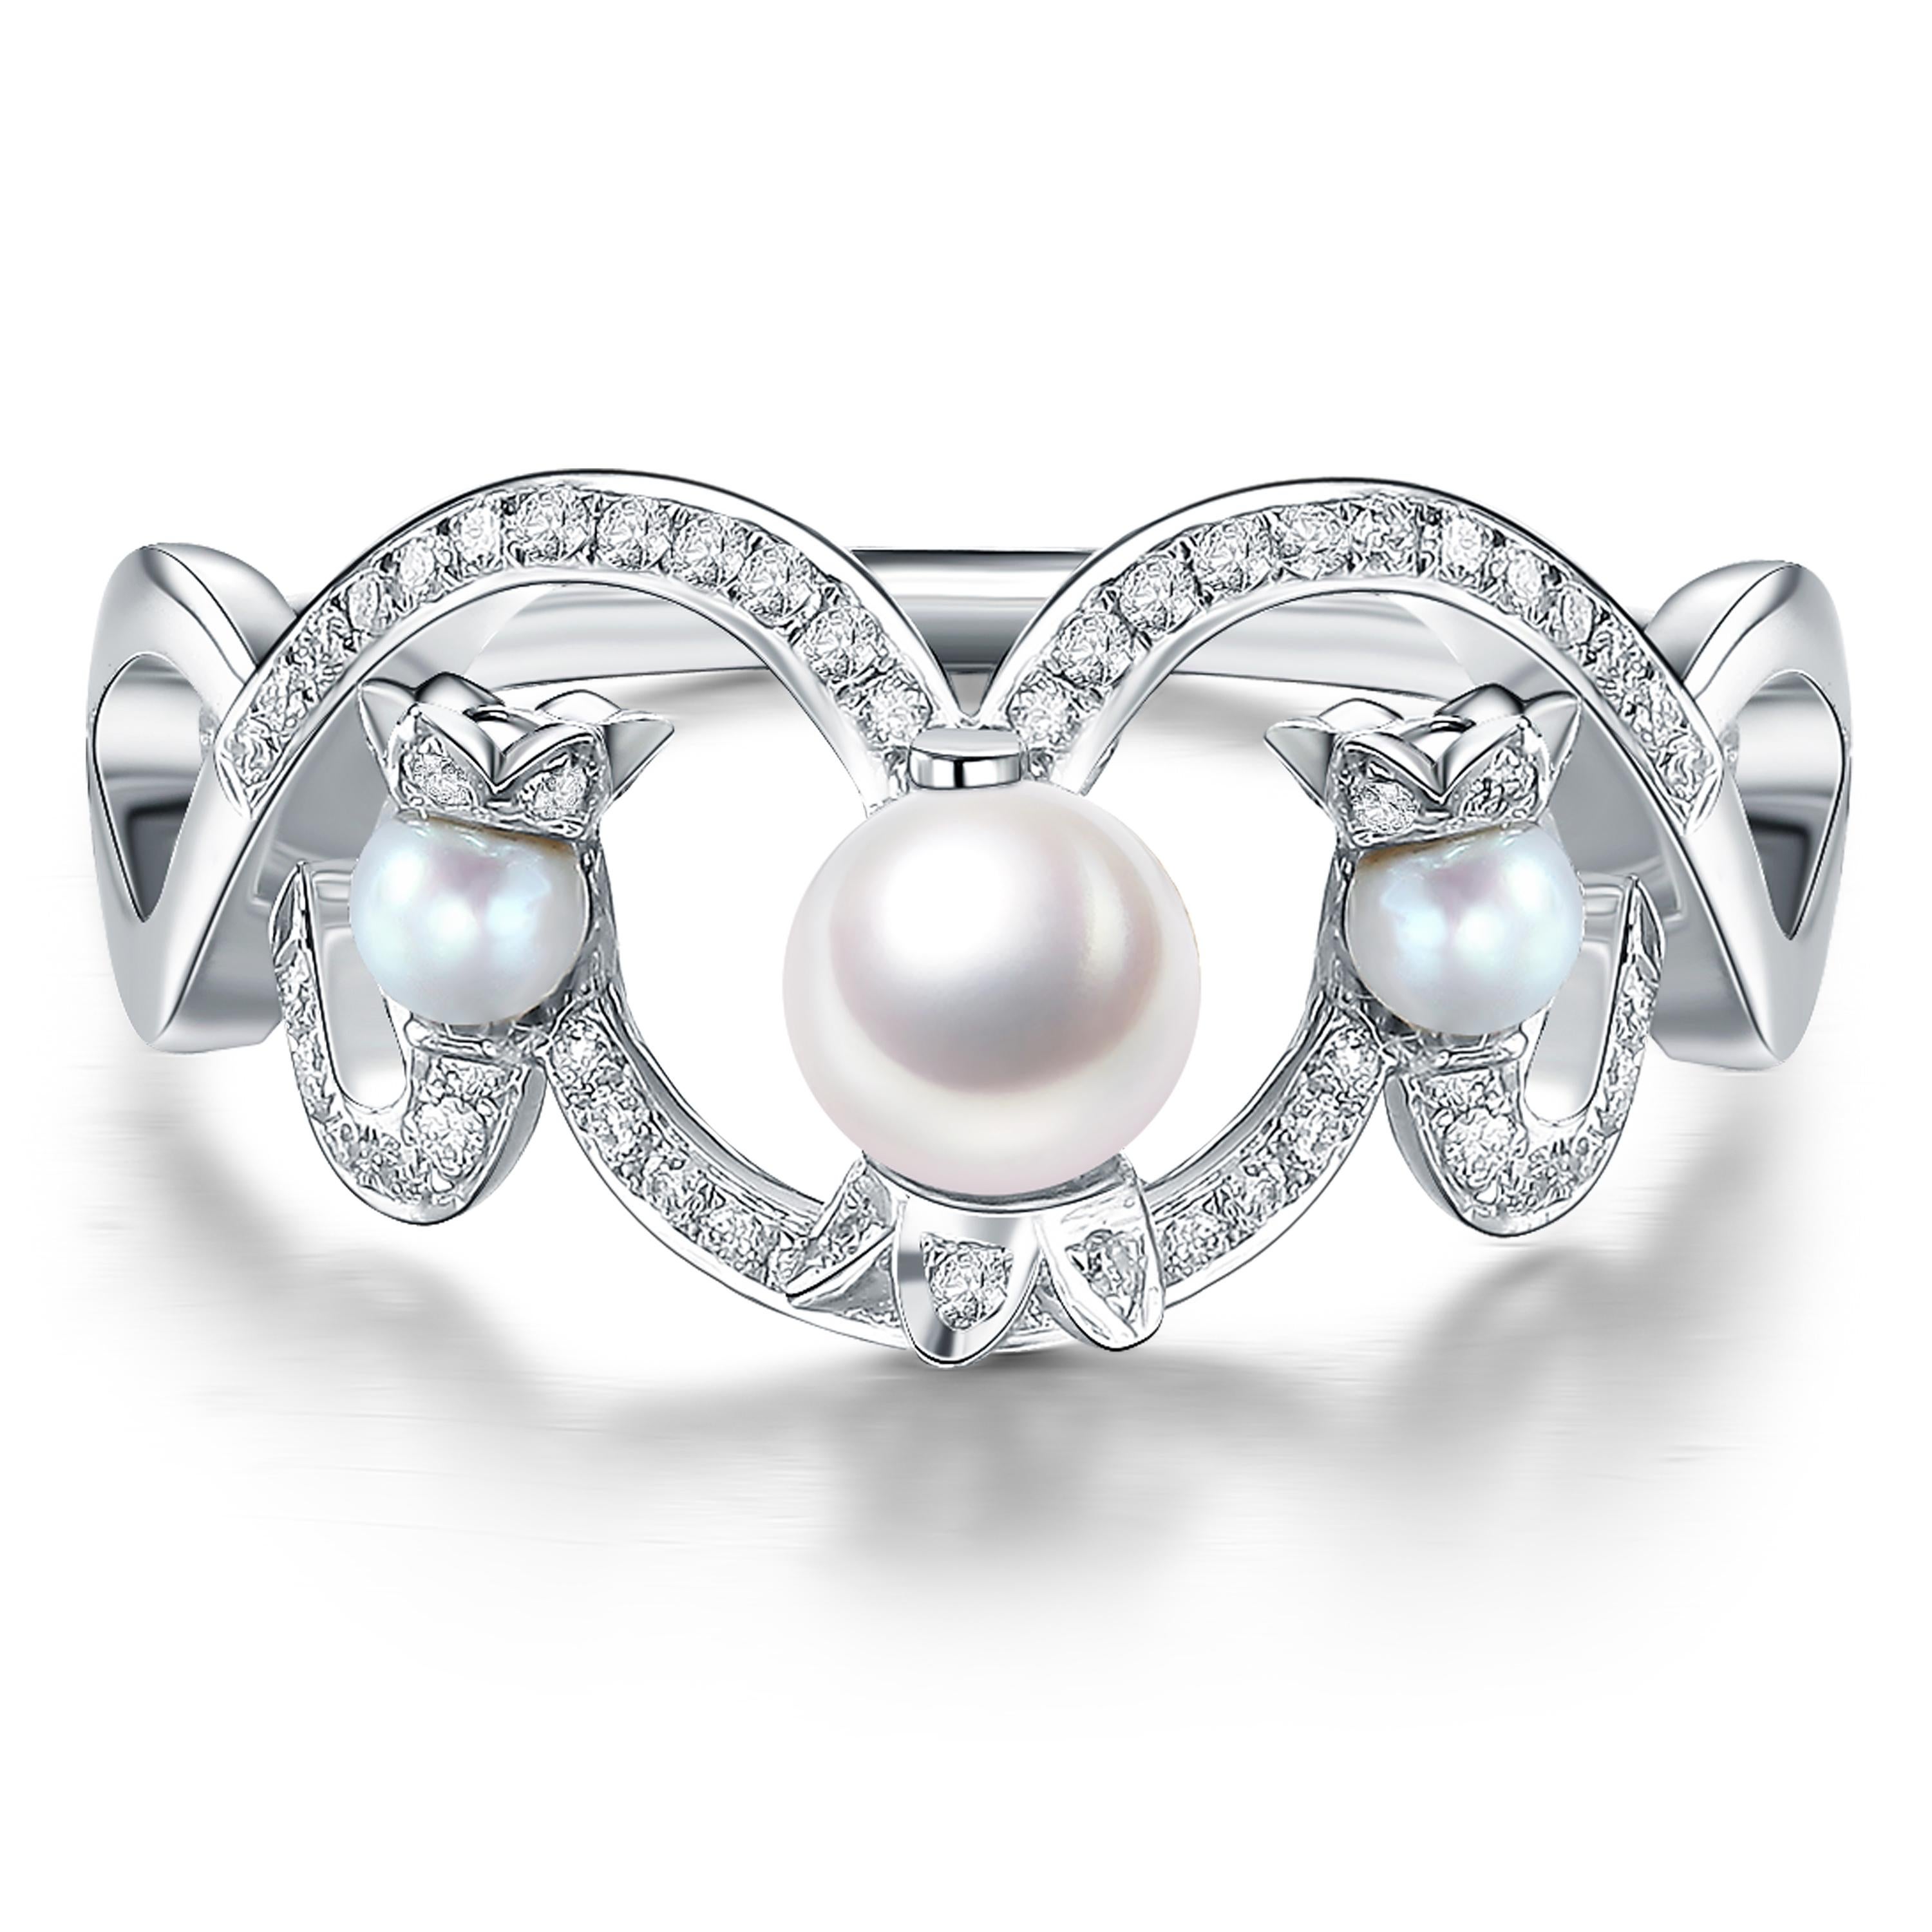 Lily of the Valley large ring with 1-3mm pearls and 0.2ct white diamonds, set in 9ct white gold with a high polish.

- Size (LxW): 20mm x 10mm
- Weight: 2.7gm
- Ring size: M1/2

Fei Liu Fine Jewellery is an independent jewellery designer brand based